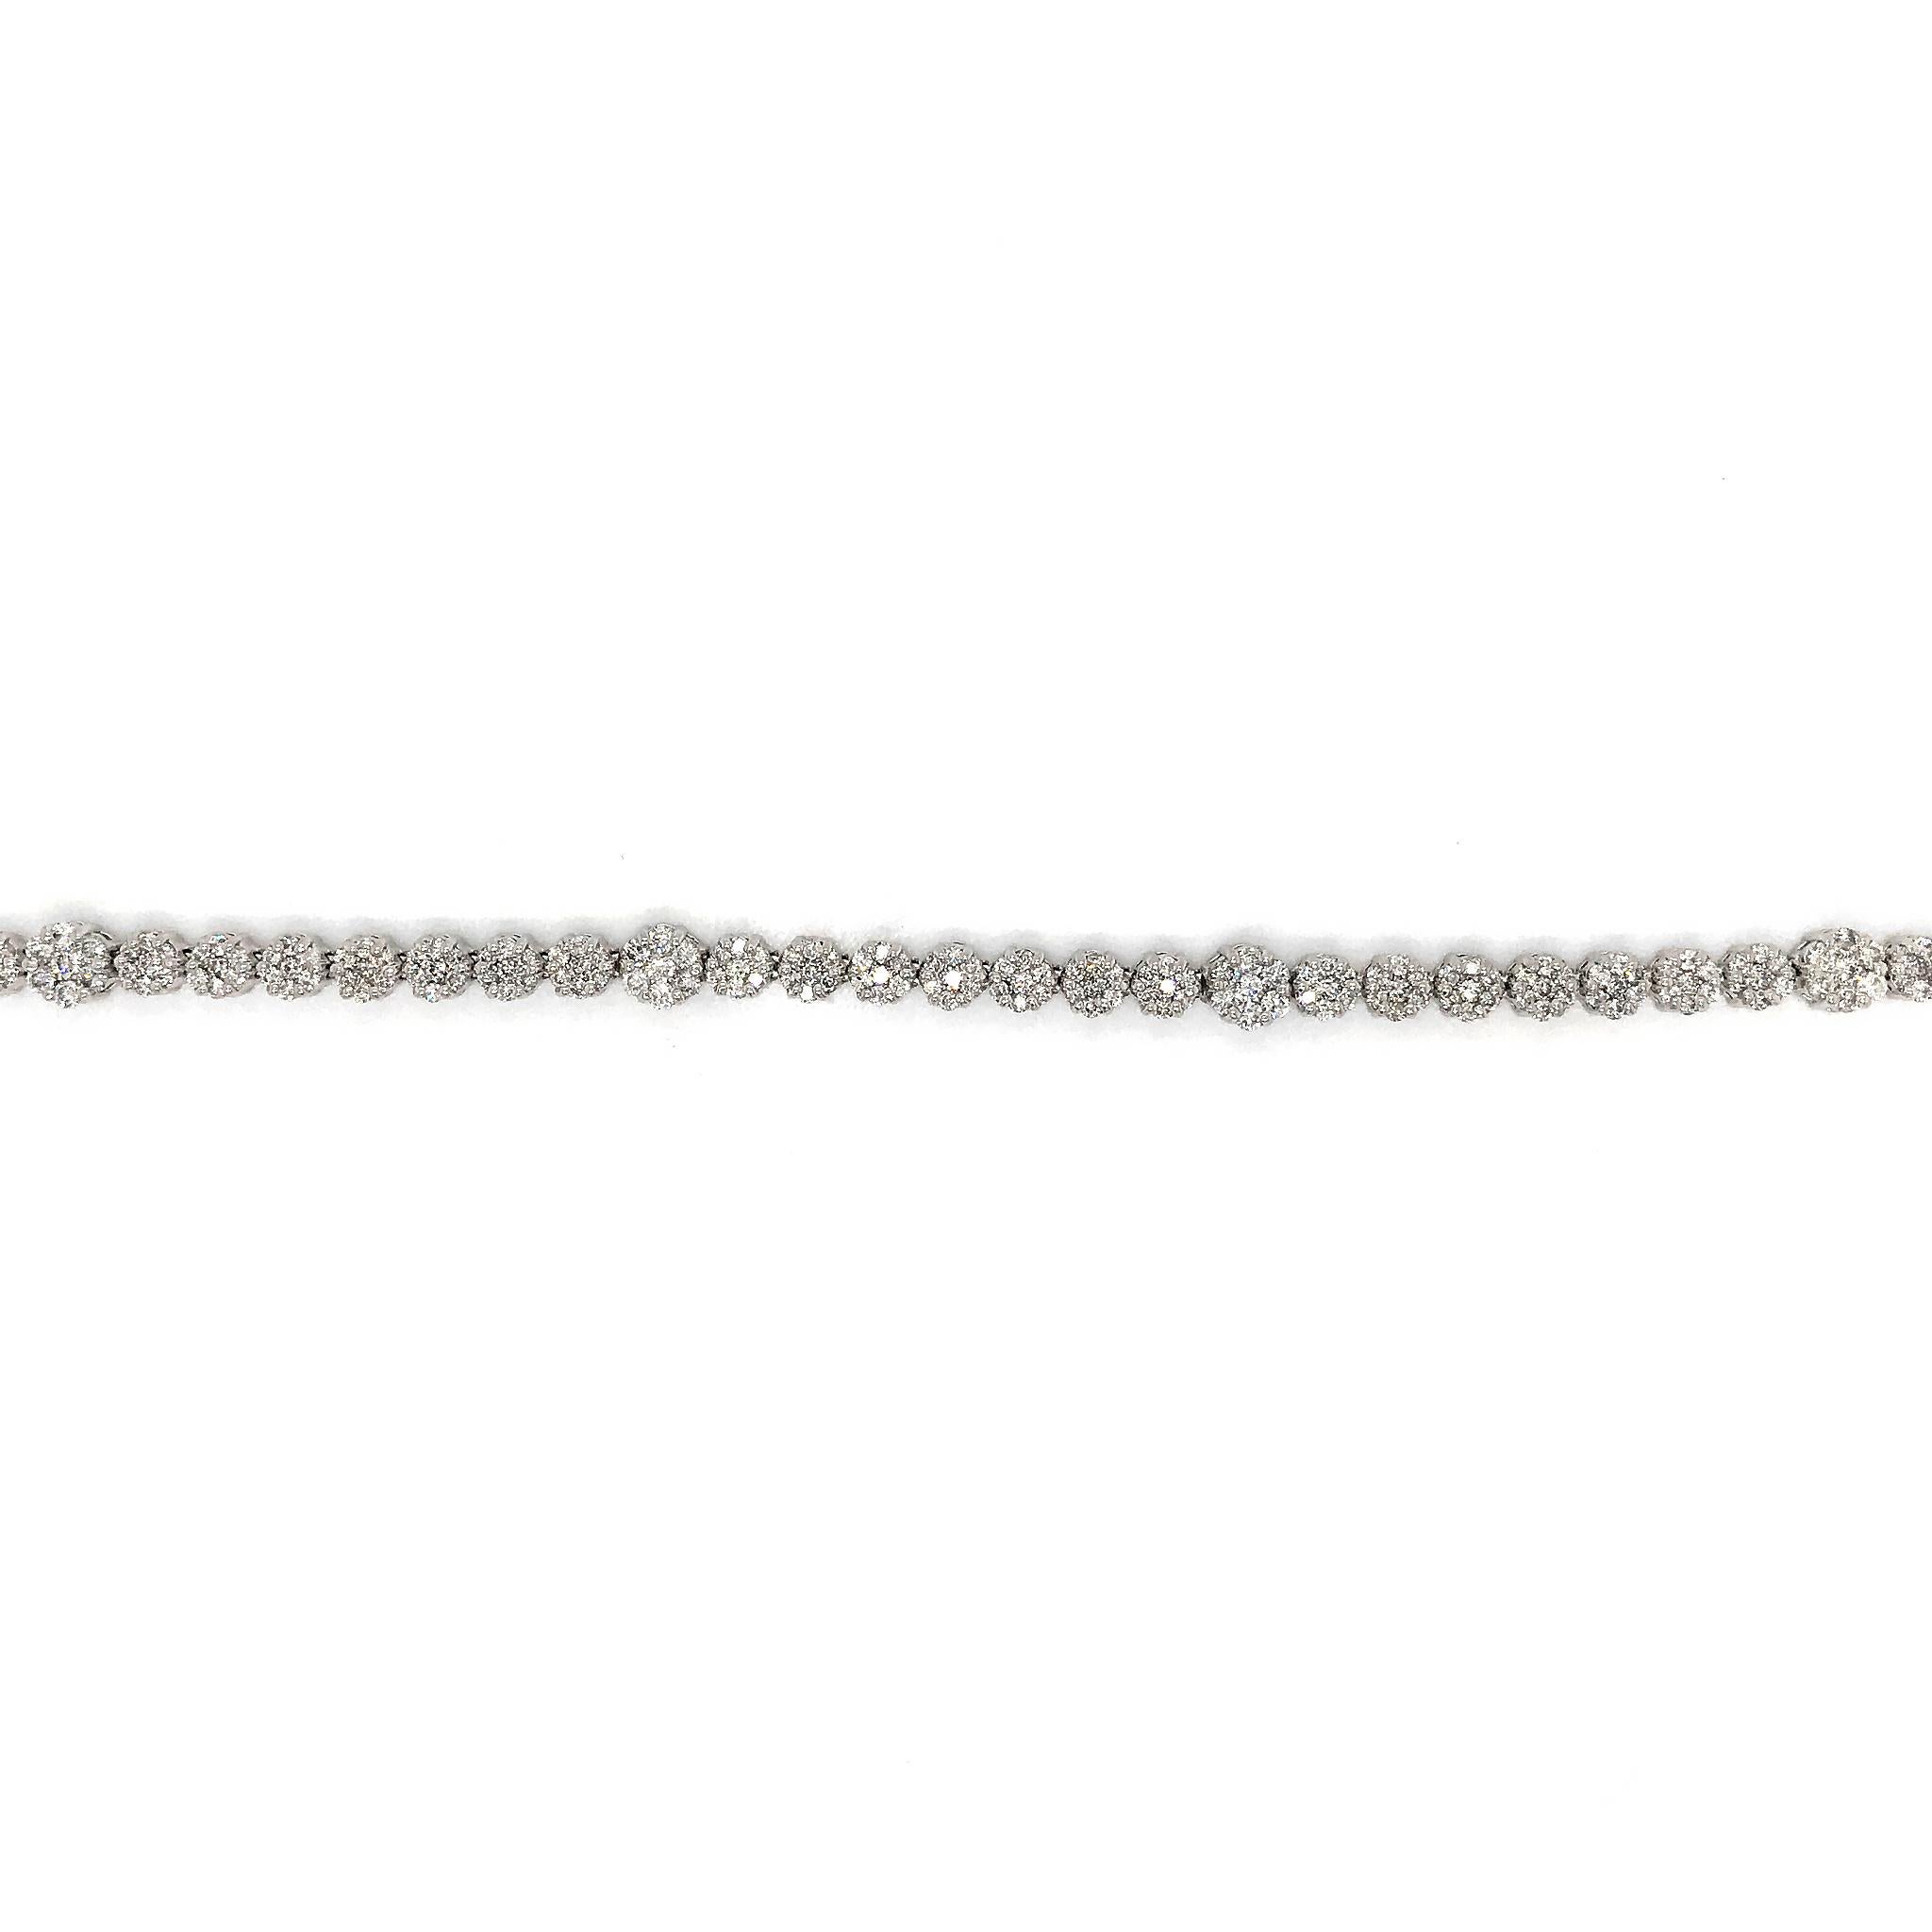 METAL TYPE: 14k White Gold
STONE WEIGHT: 1.25ct twd
TOTAL WEIGHT: 14.5 grams
BRACELET LENGTH: 7.5 inches